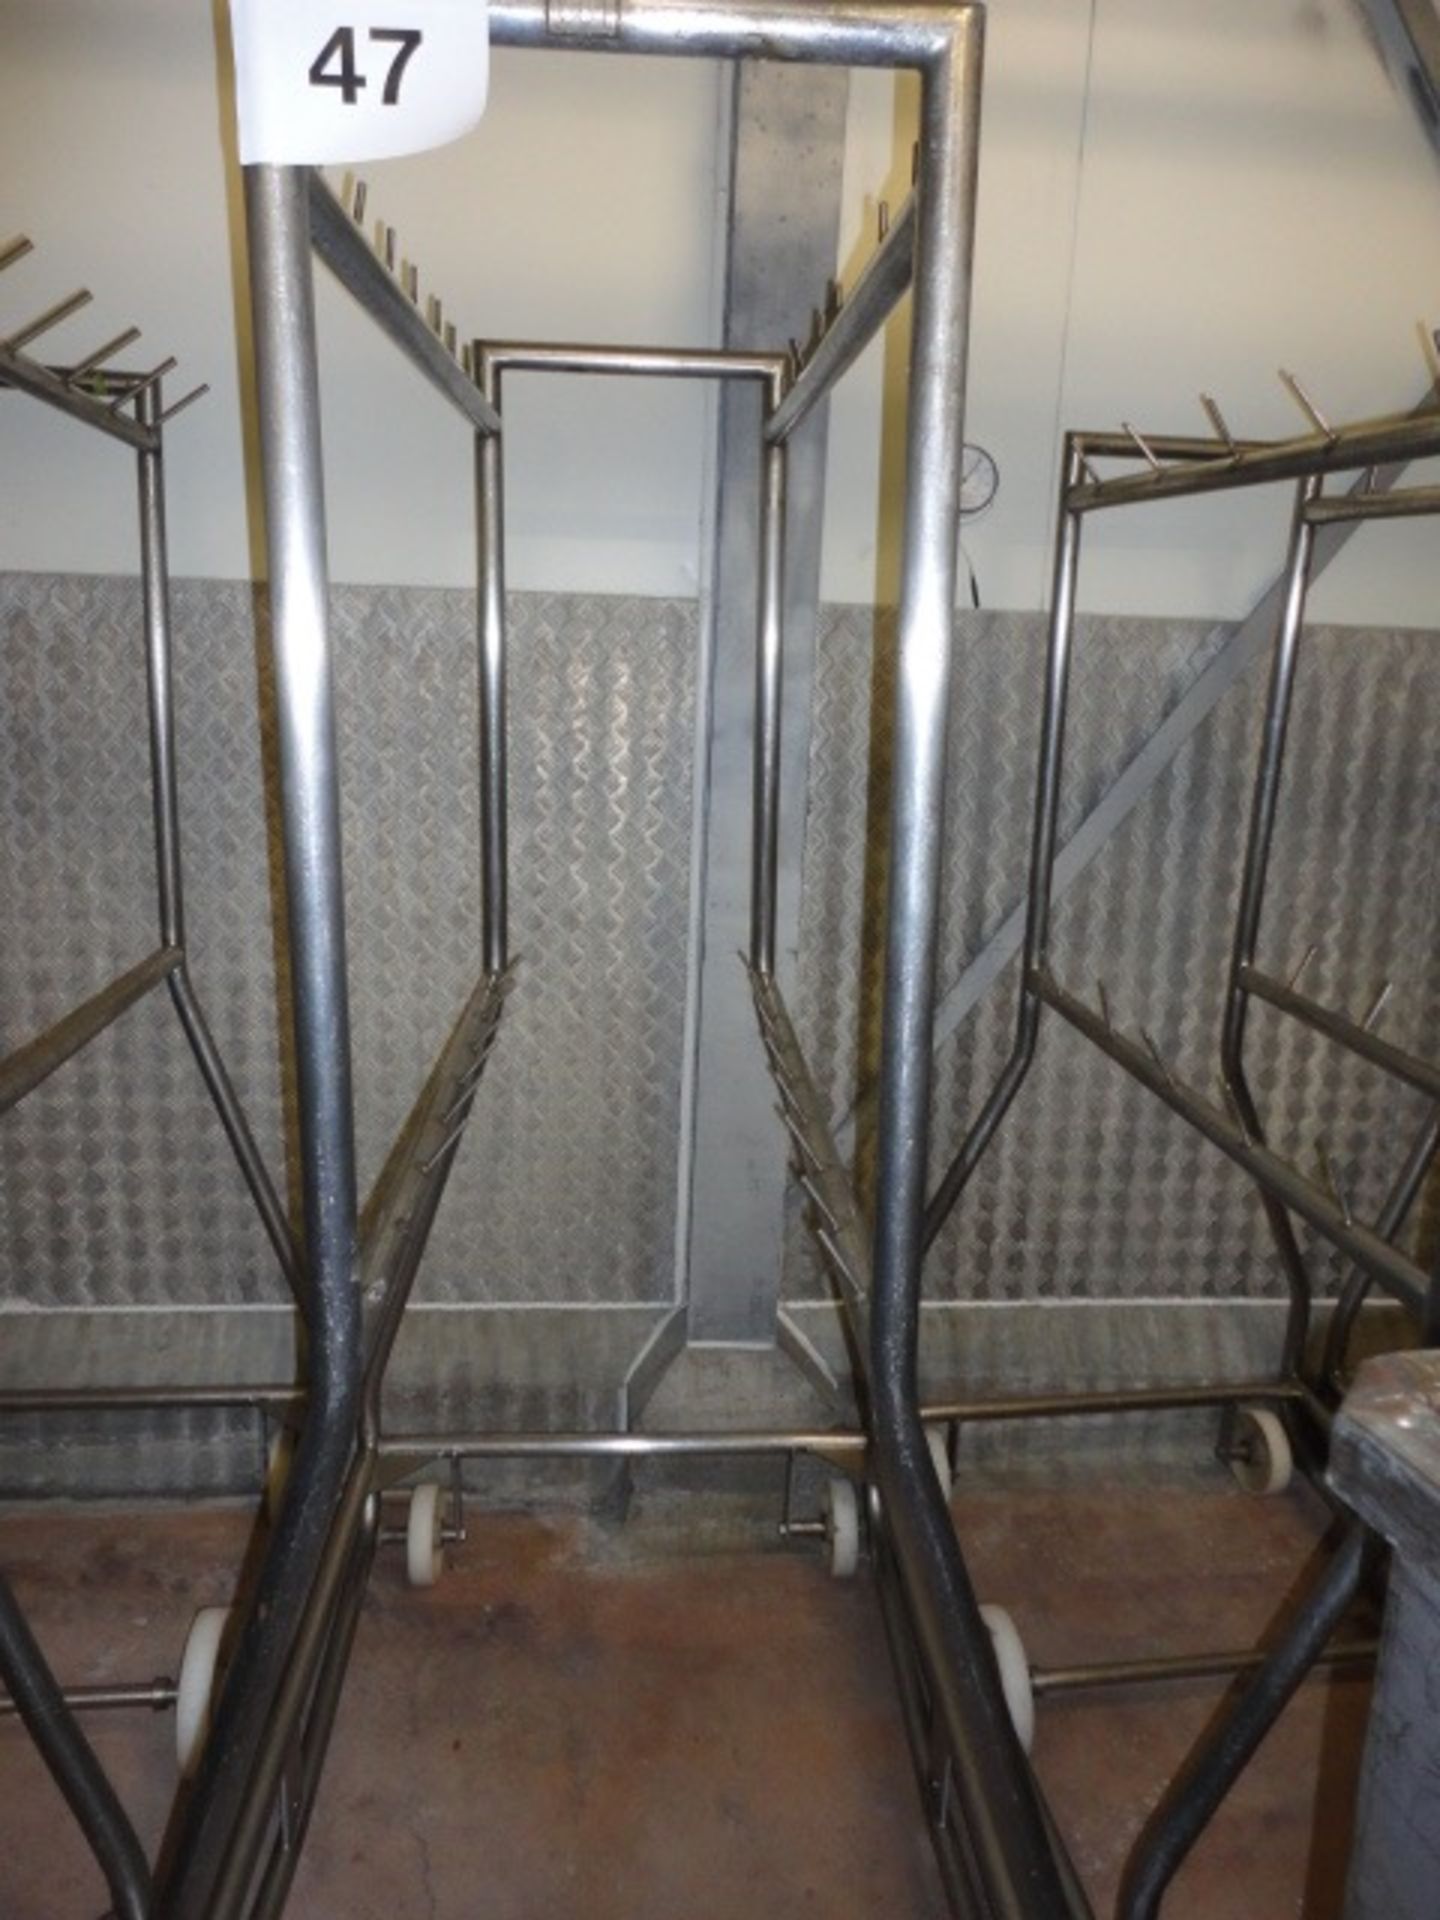 Mobile s/s rack on 4 wheels  approx. 1000mm long x 1800mm high LIFT OUT £5